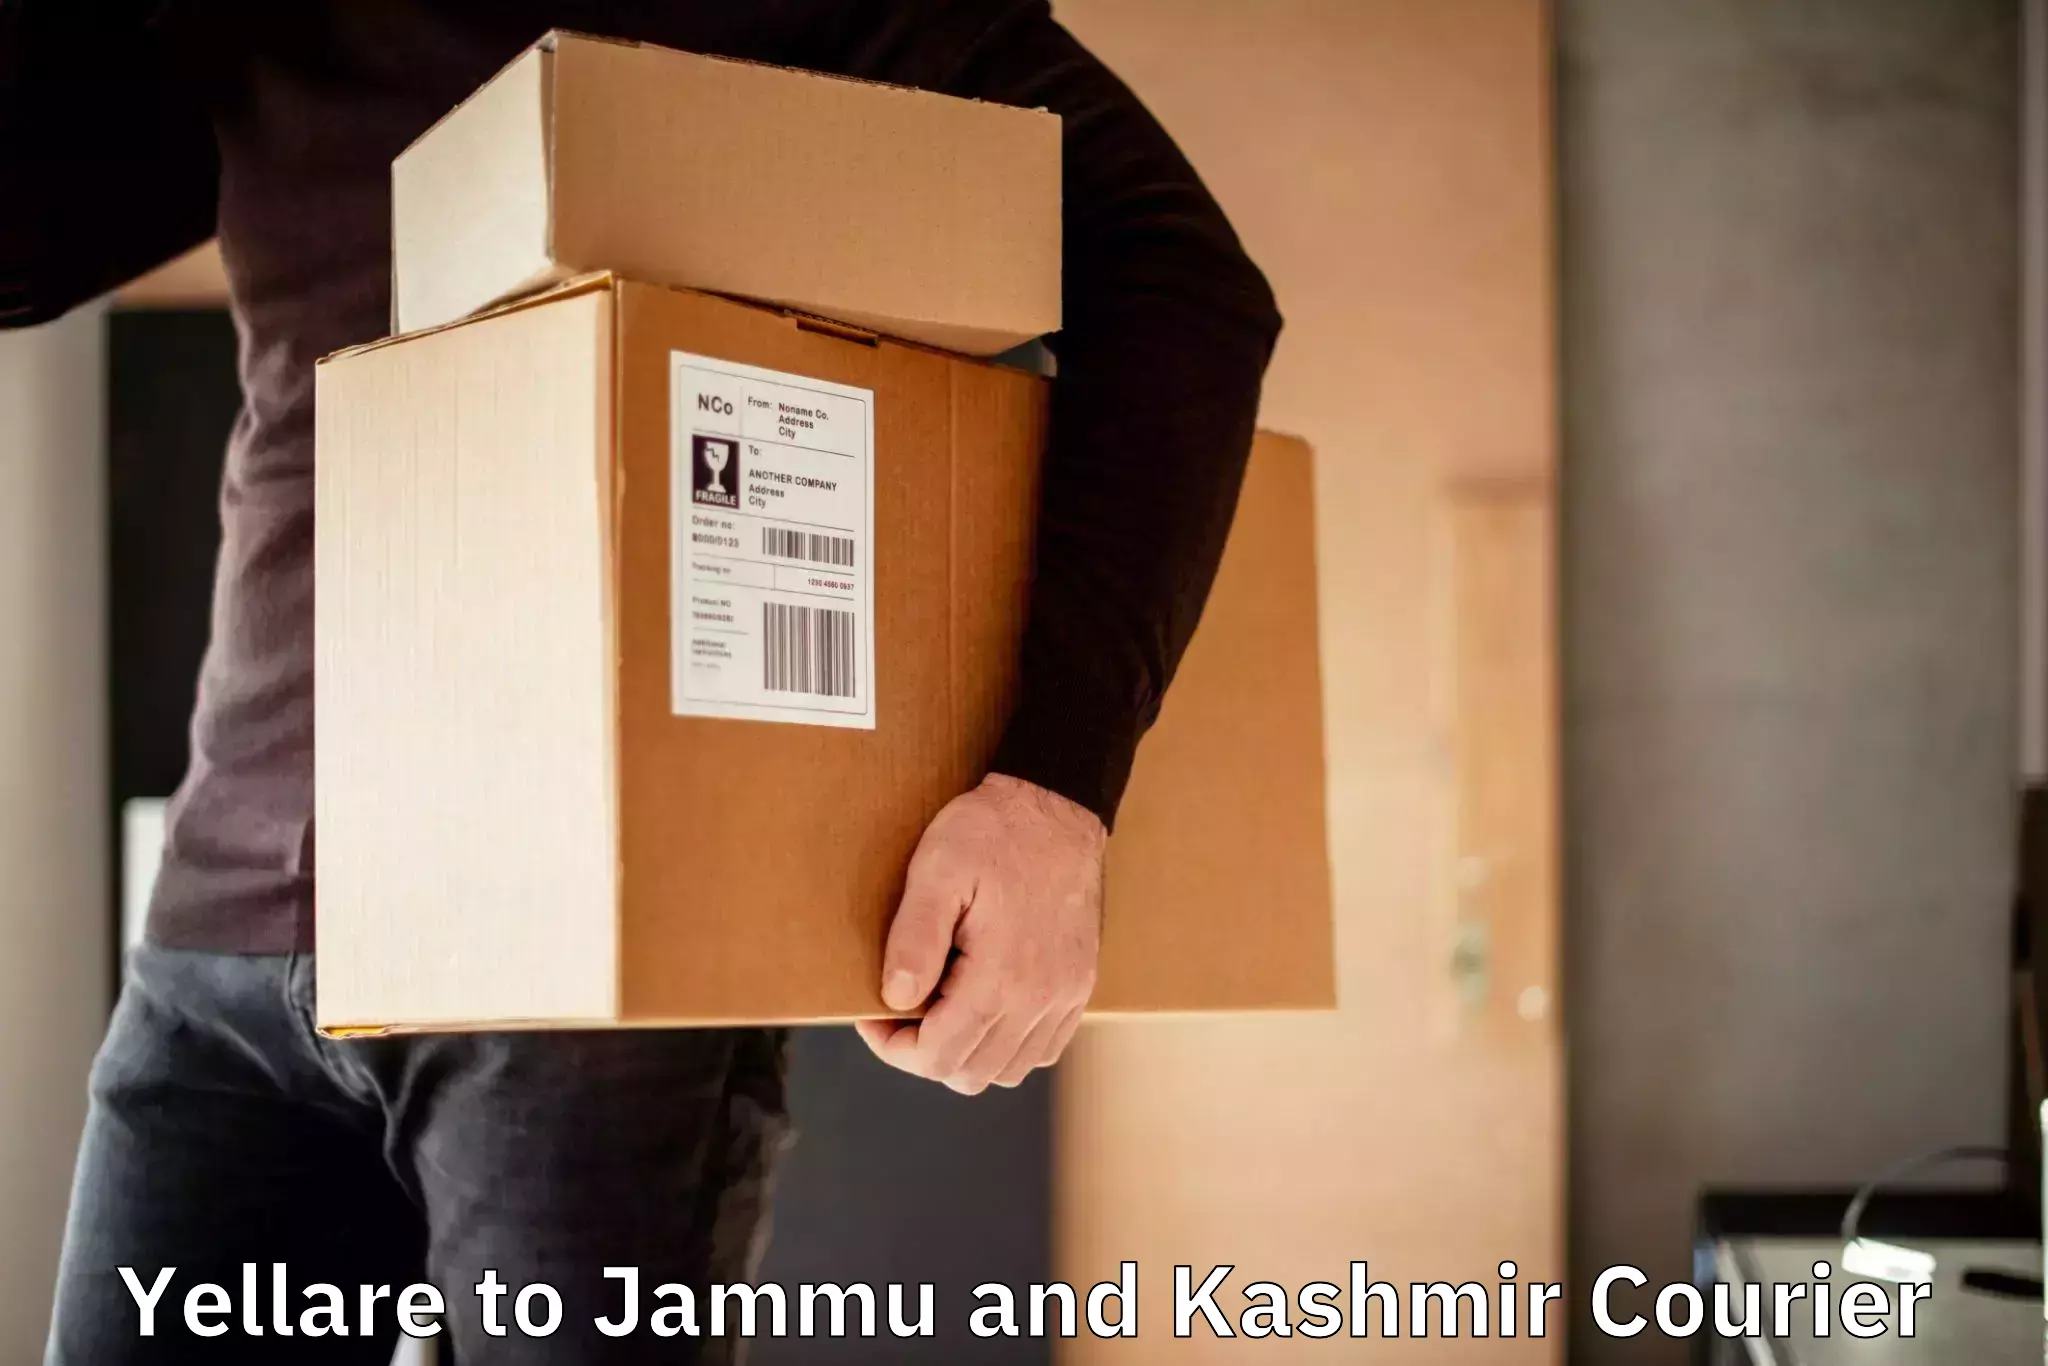 Next-generation courier services Yellare to Jammu and Kashmir